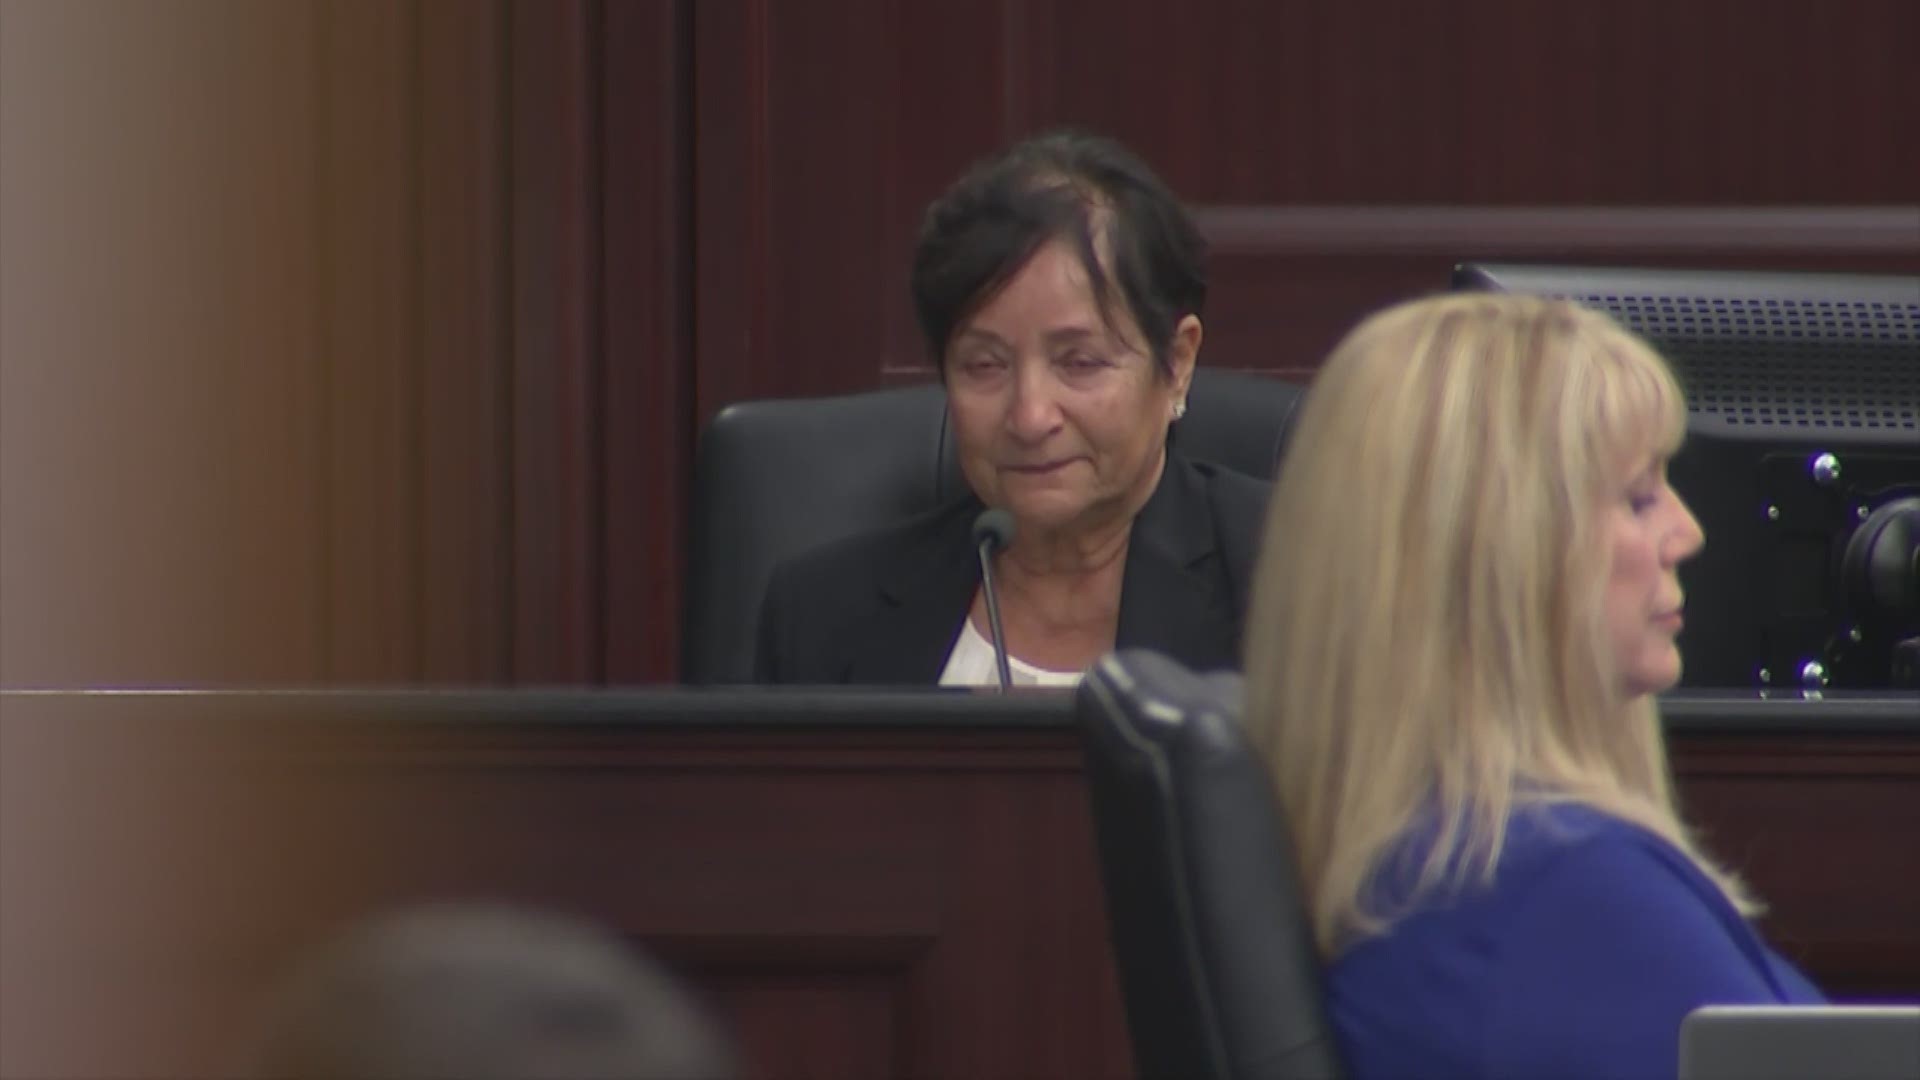 Medical Examiner Valerie Rao provides some emotional testimony in the Cherish Perrywinkle case during Donald Smith's murder trial.